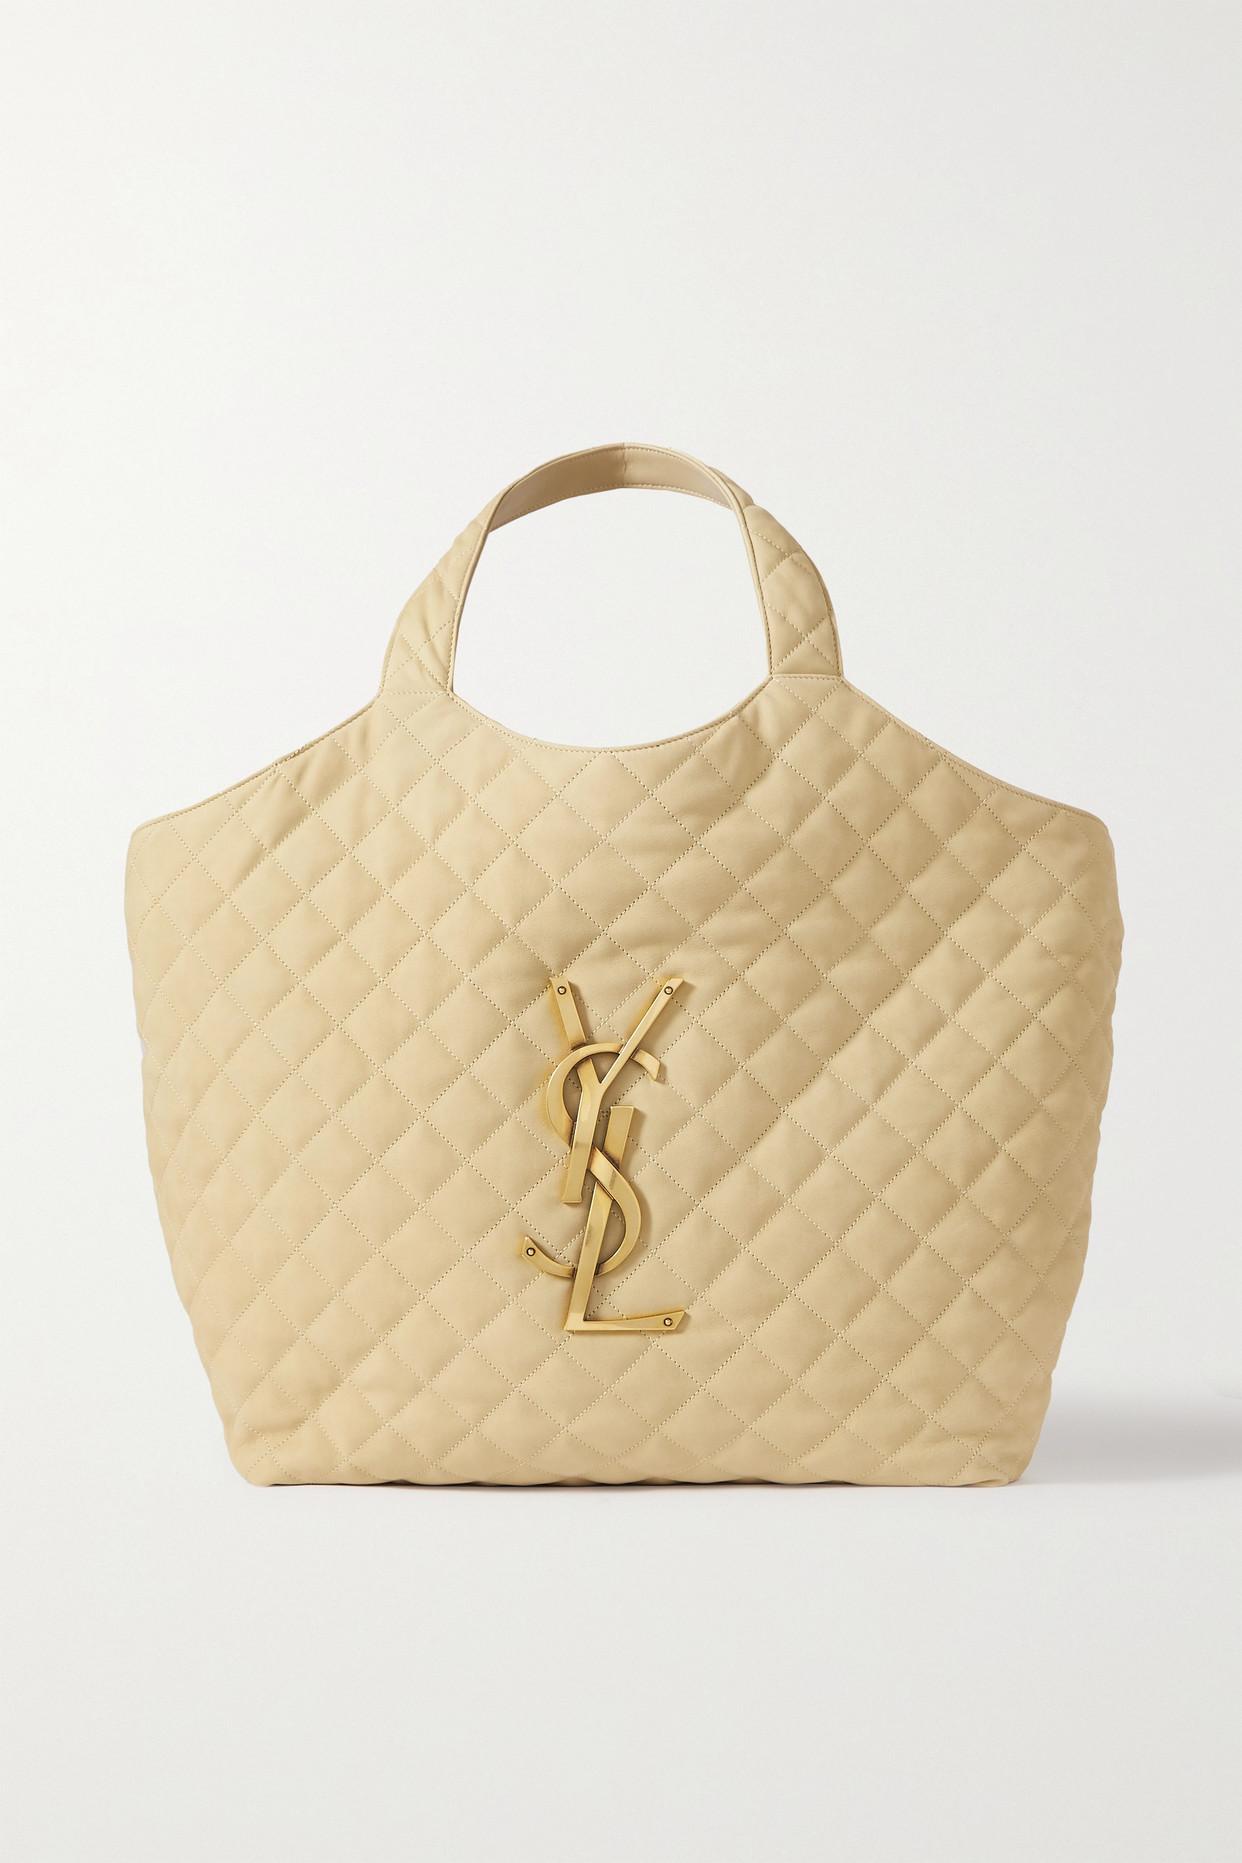 Saint Laurent Icare Quilted Leather Tote in Natural | Lyst Canada